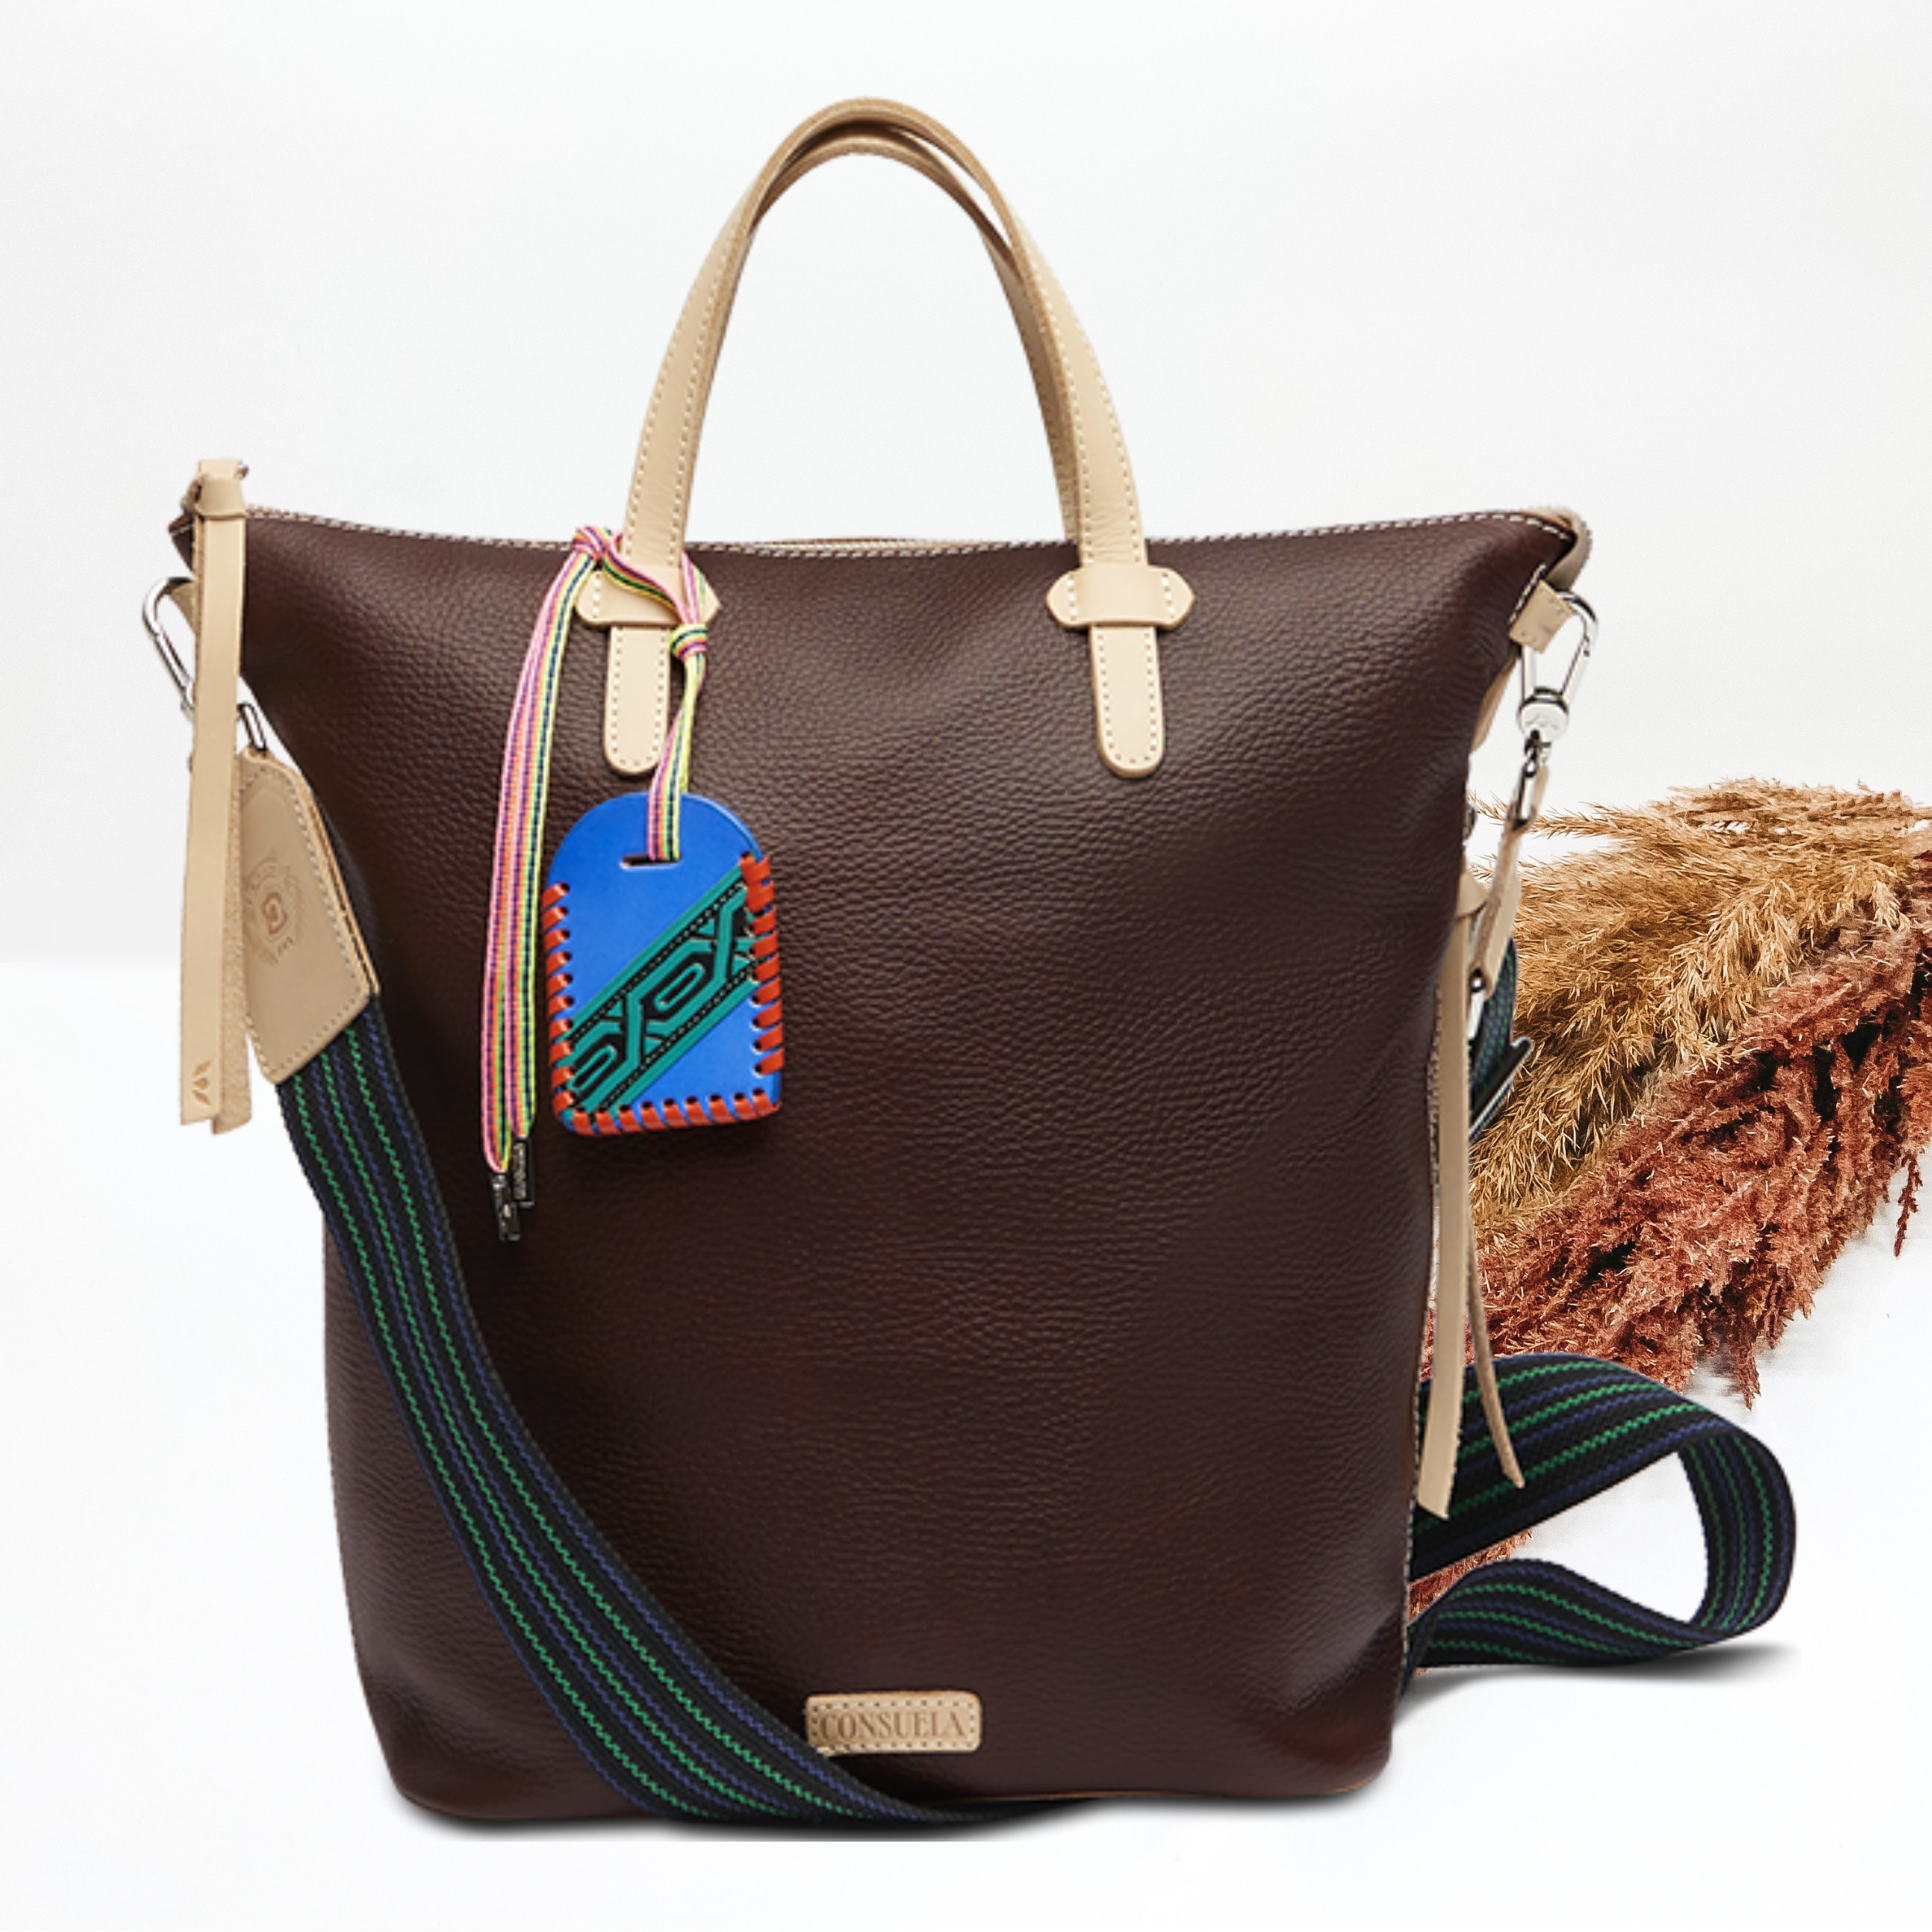 Shop Consuela Handbags, Totes, and Accessories at Giddy Up Glamour